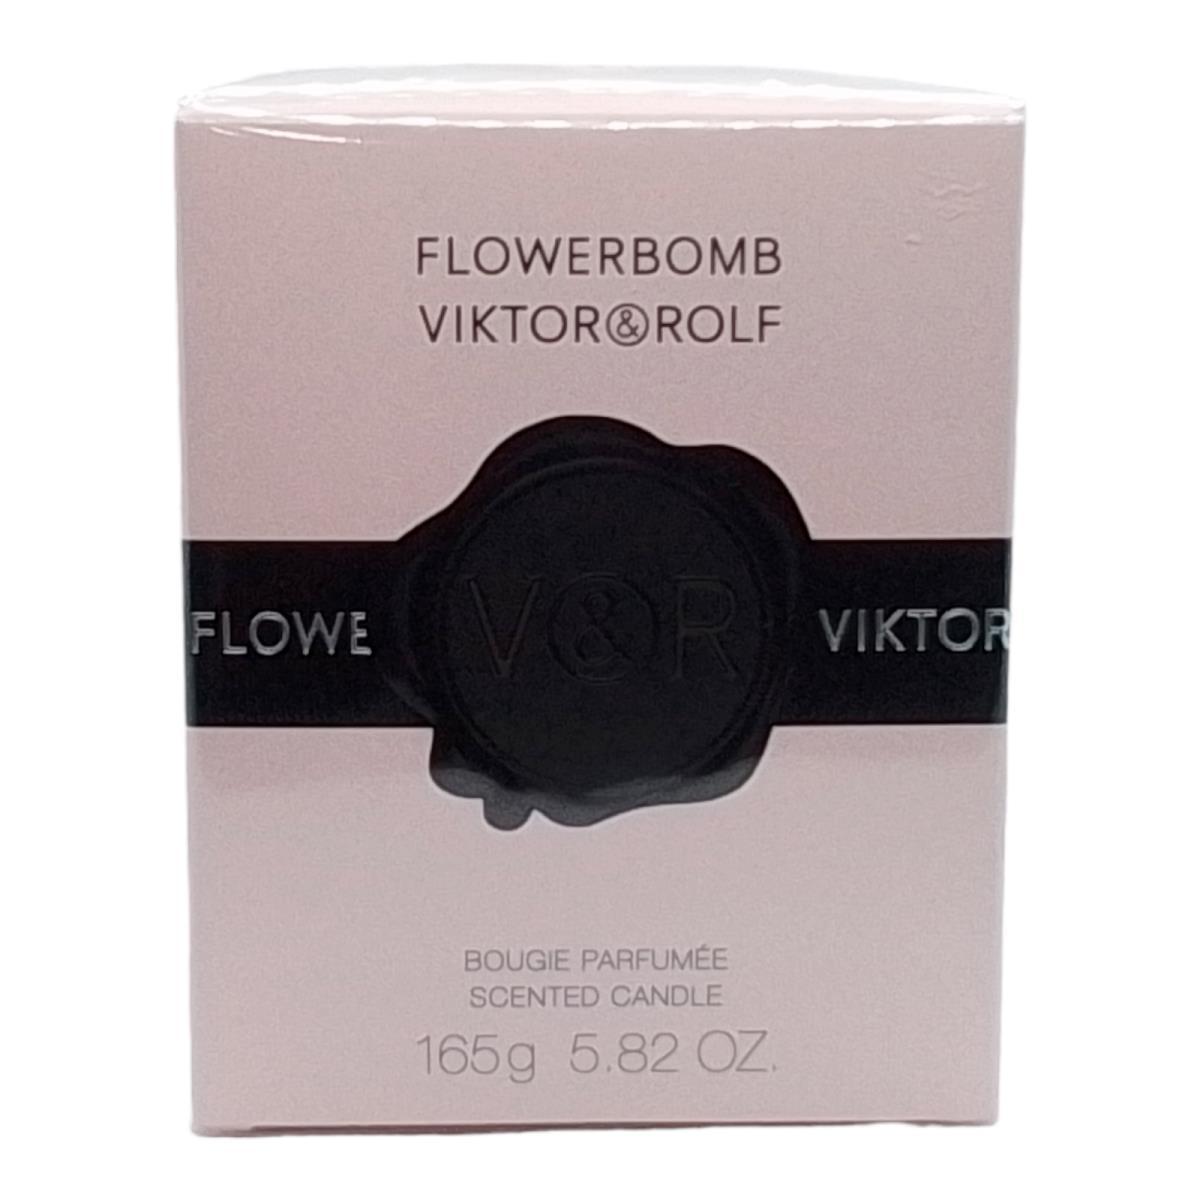 Viktor Rolf Flowerbomb Bougie Perfume Scented Candle 5.8 oz 165 g